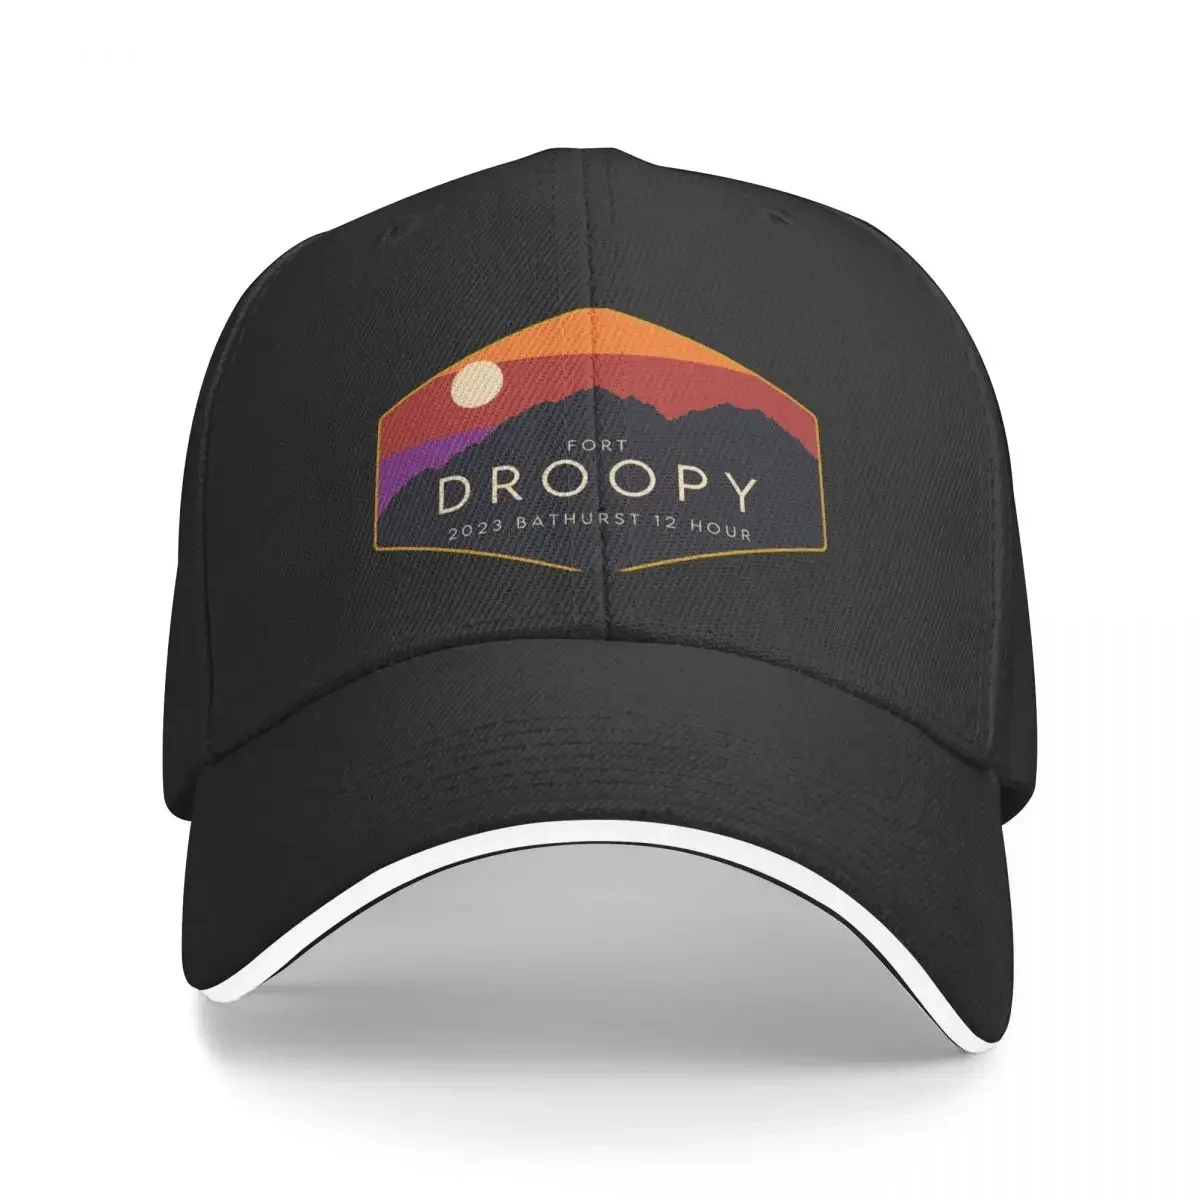 

New Fort Droopy 2023 Alternate Logo Baseball Cap Fishing Caps Dropshipping party hats Hats For Men Women's